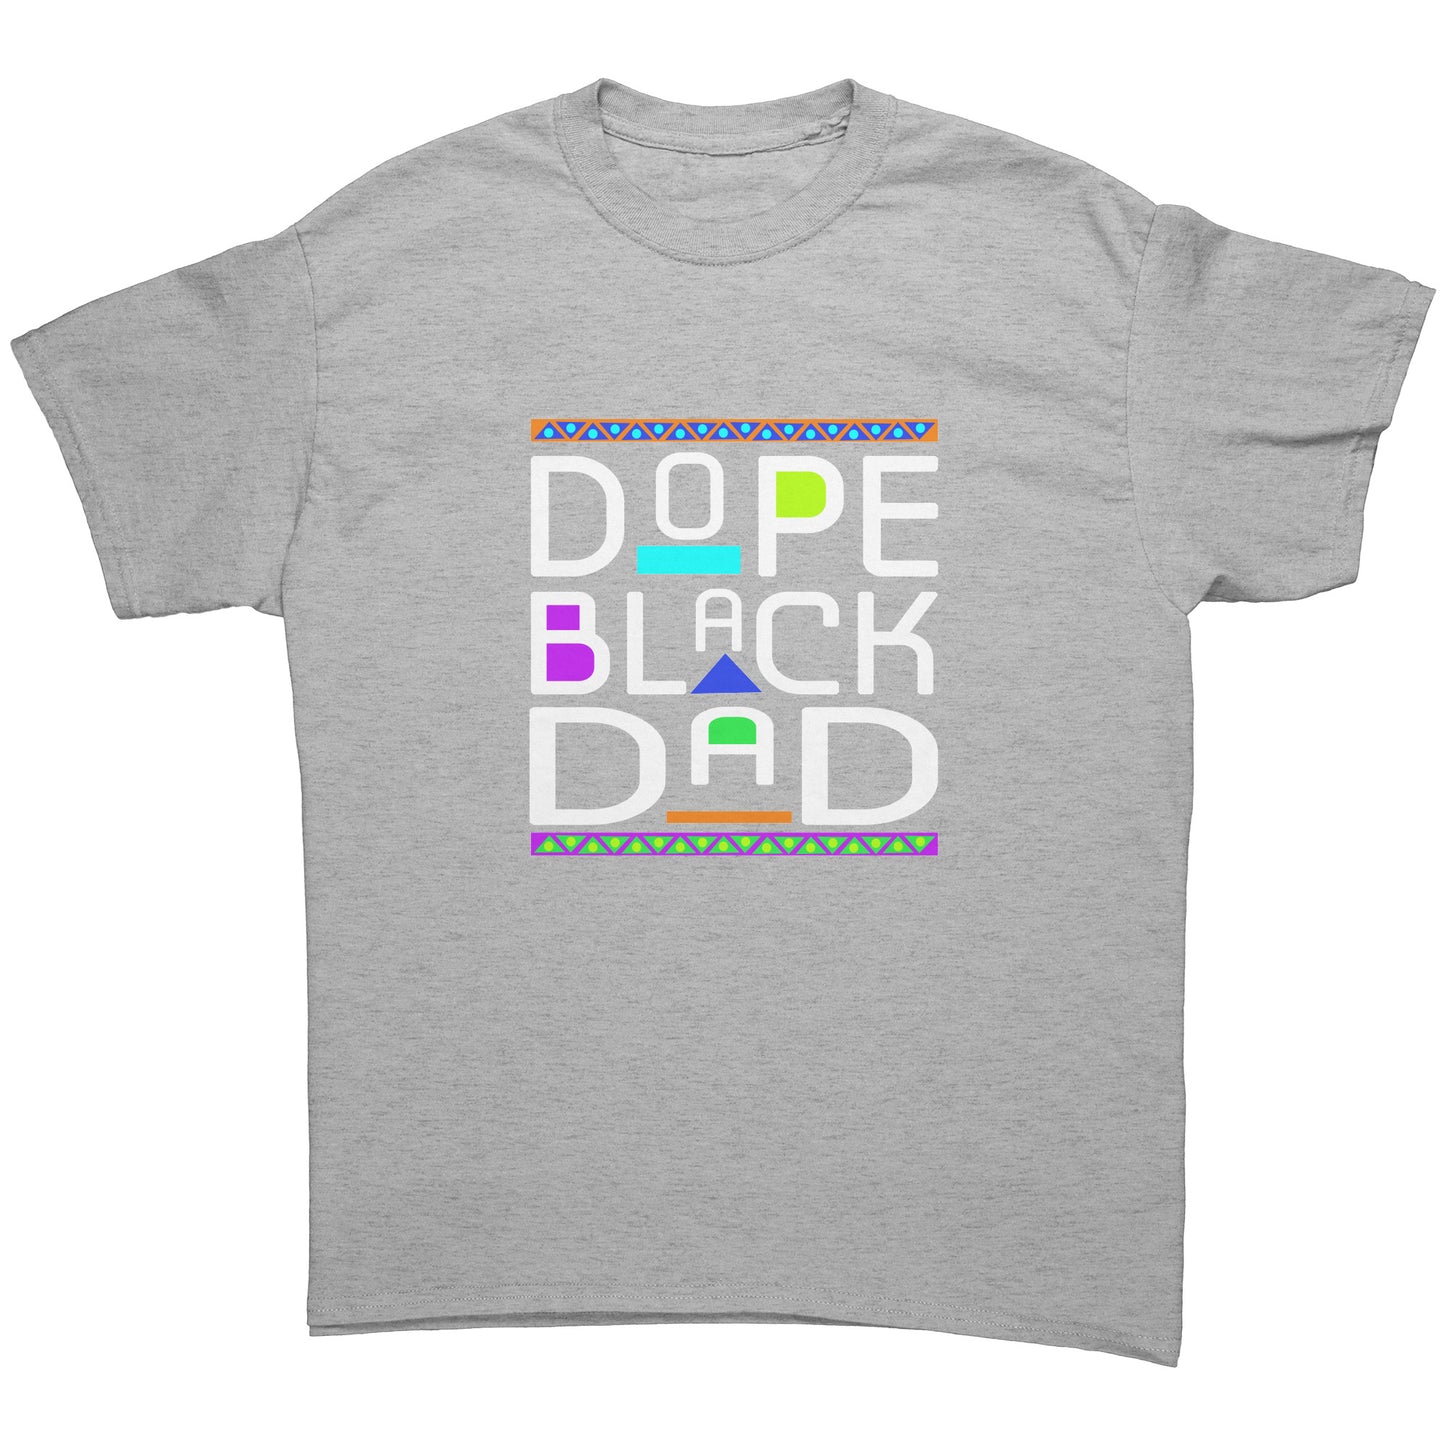 Dope Black Dad Tee White Lettering